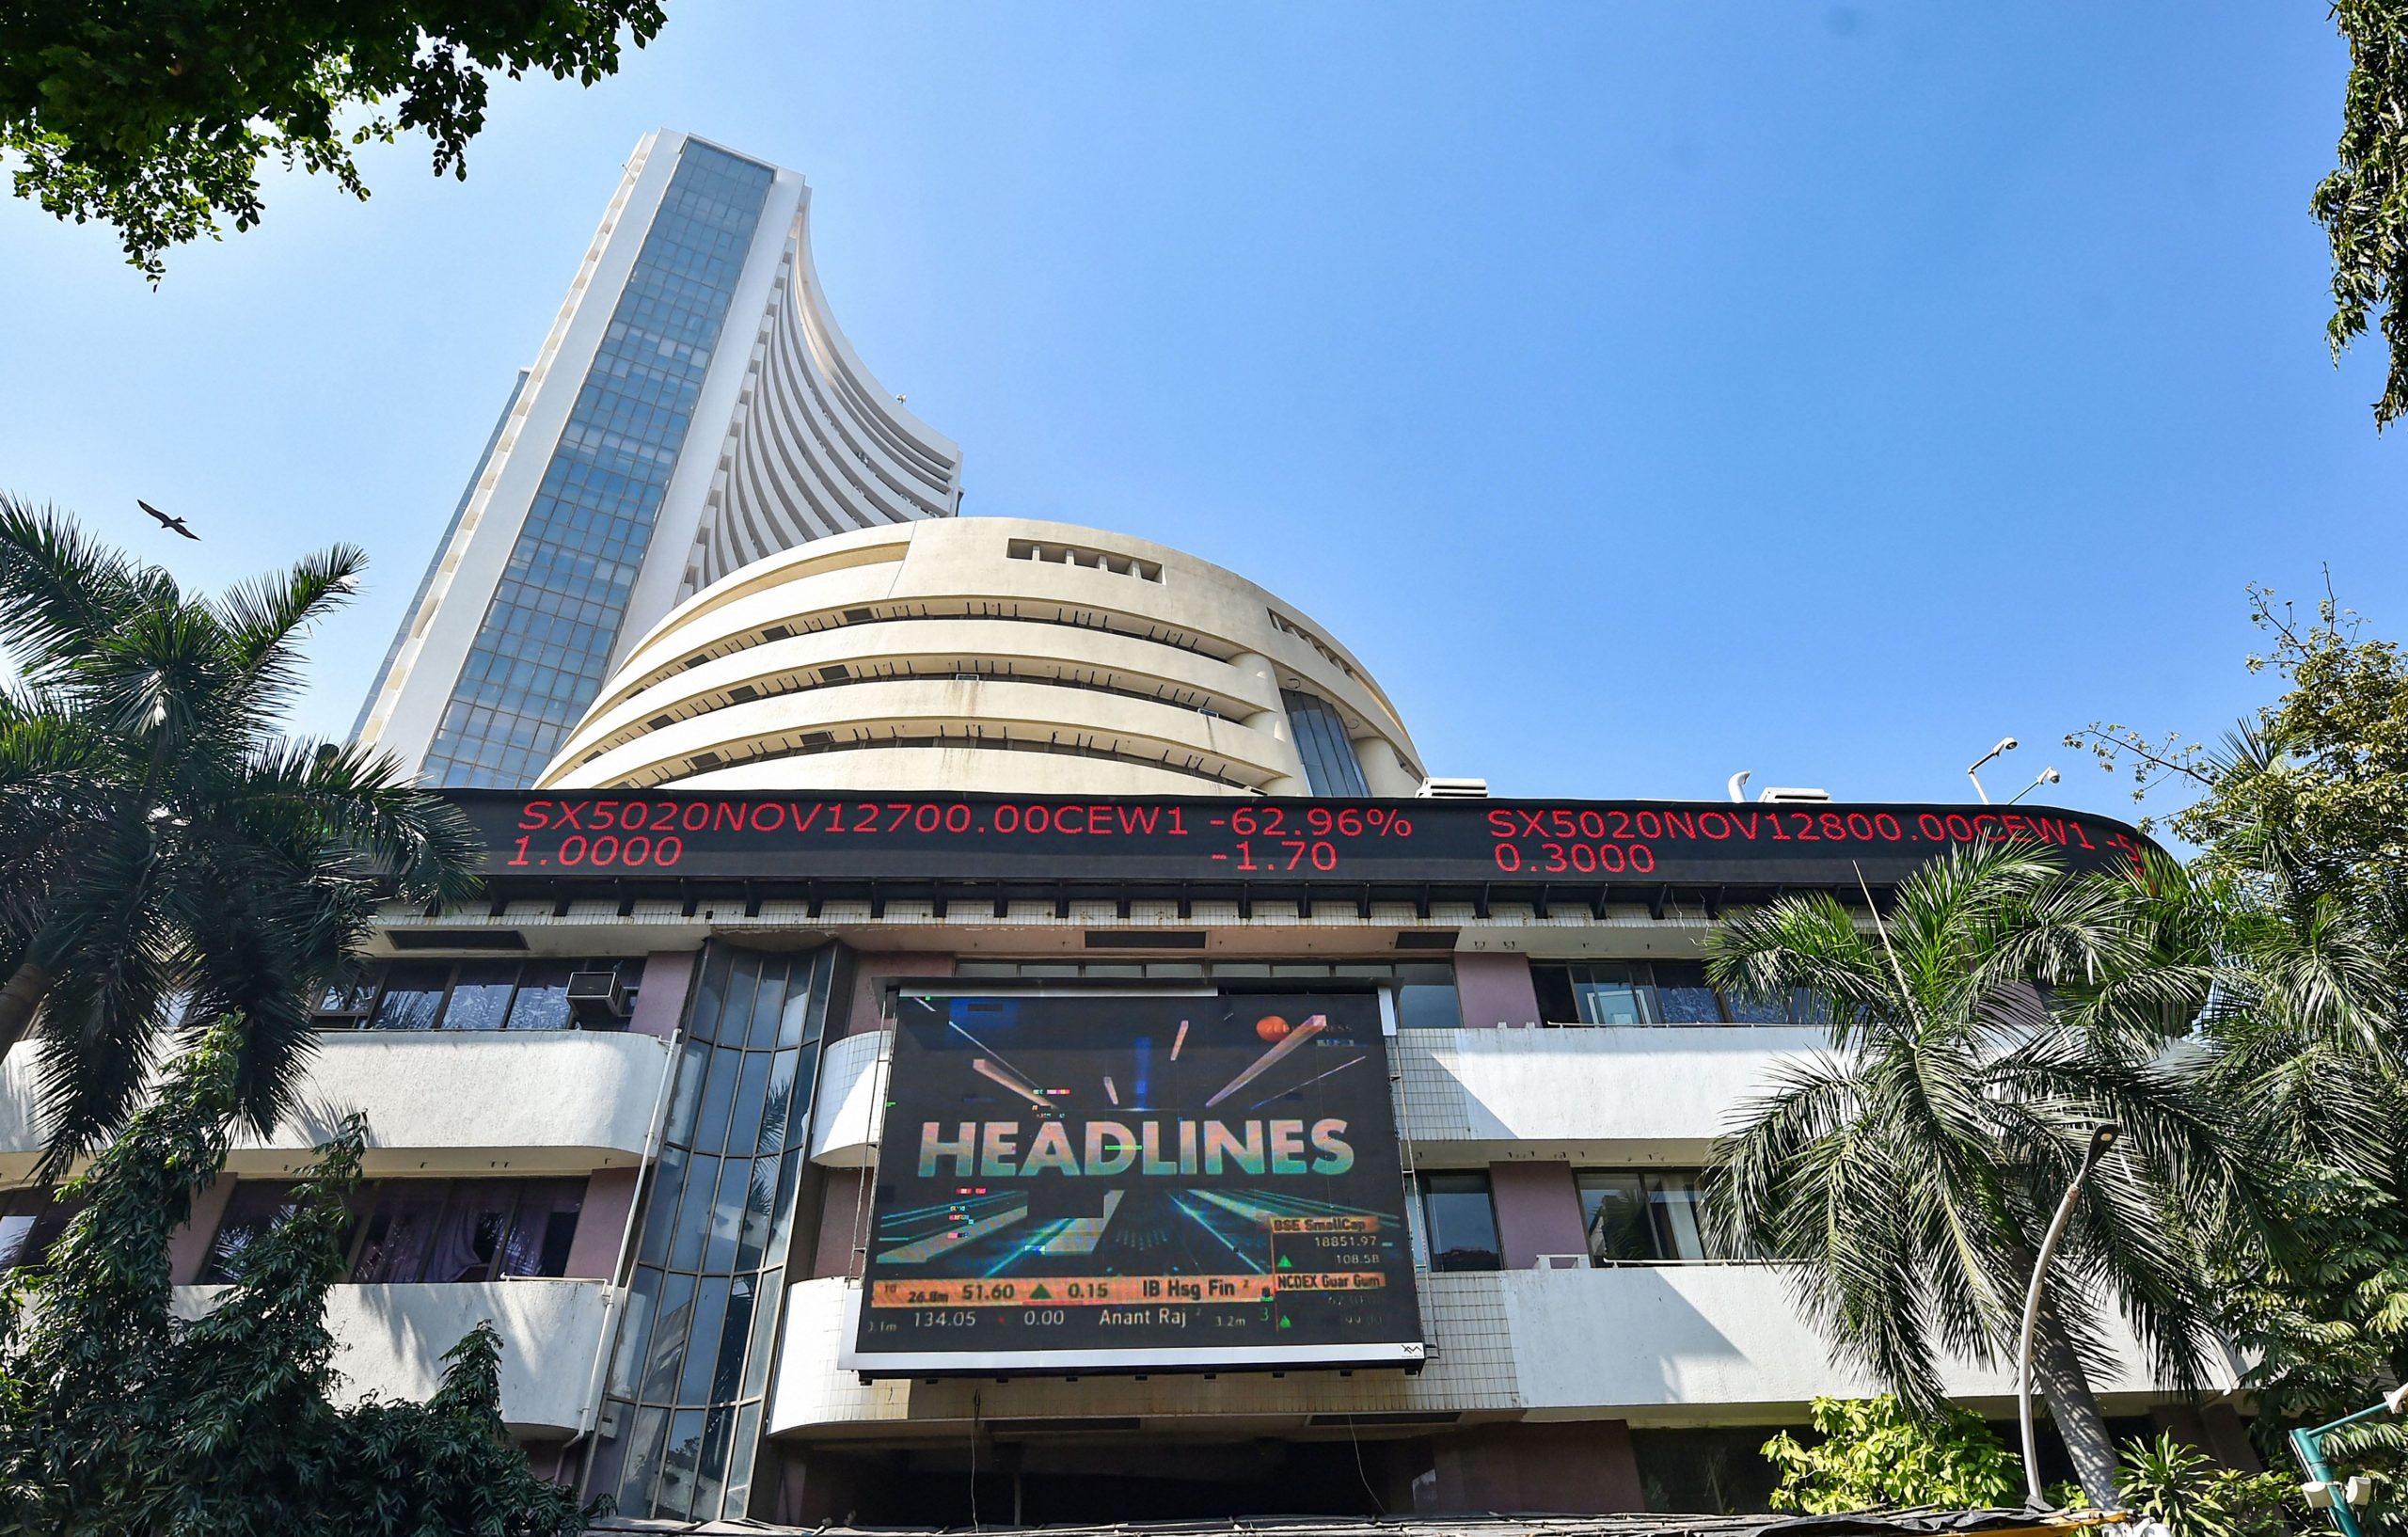 Trending Stocks: TCS, PB Fintech, 5paisa, Paytm, RSTL and others in news today